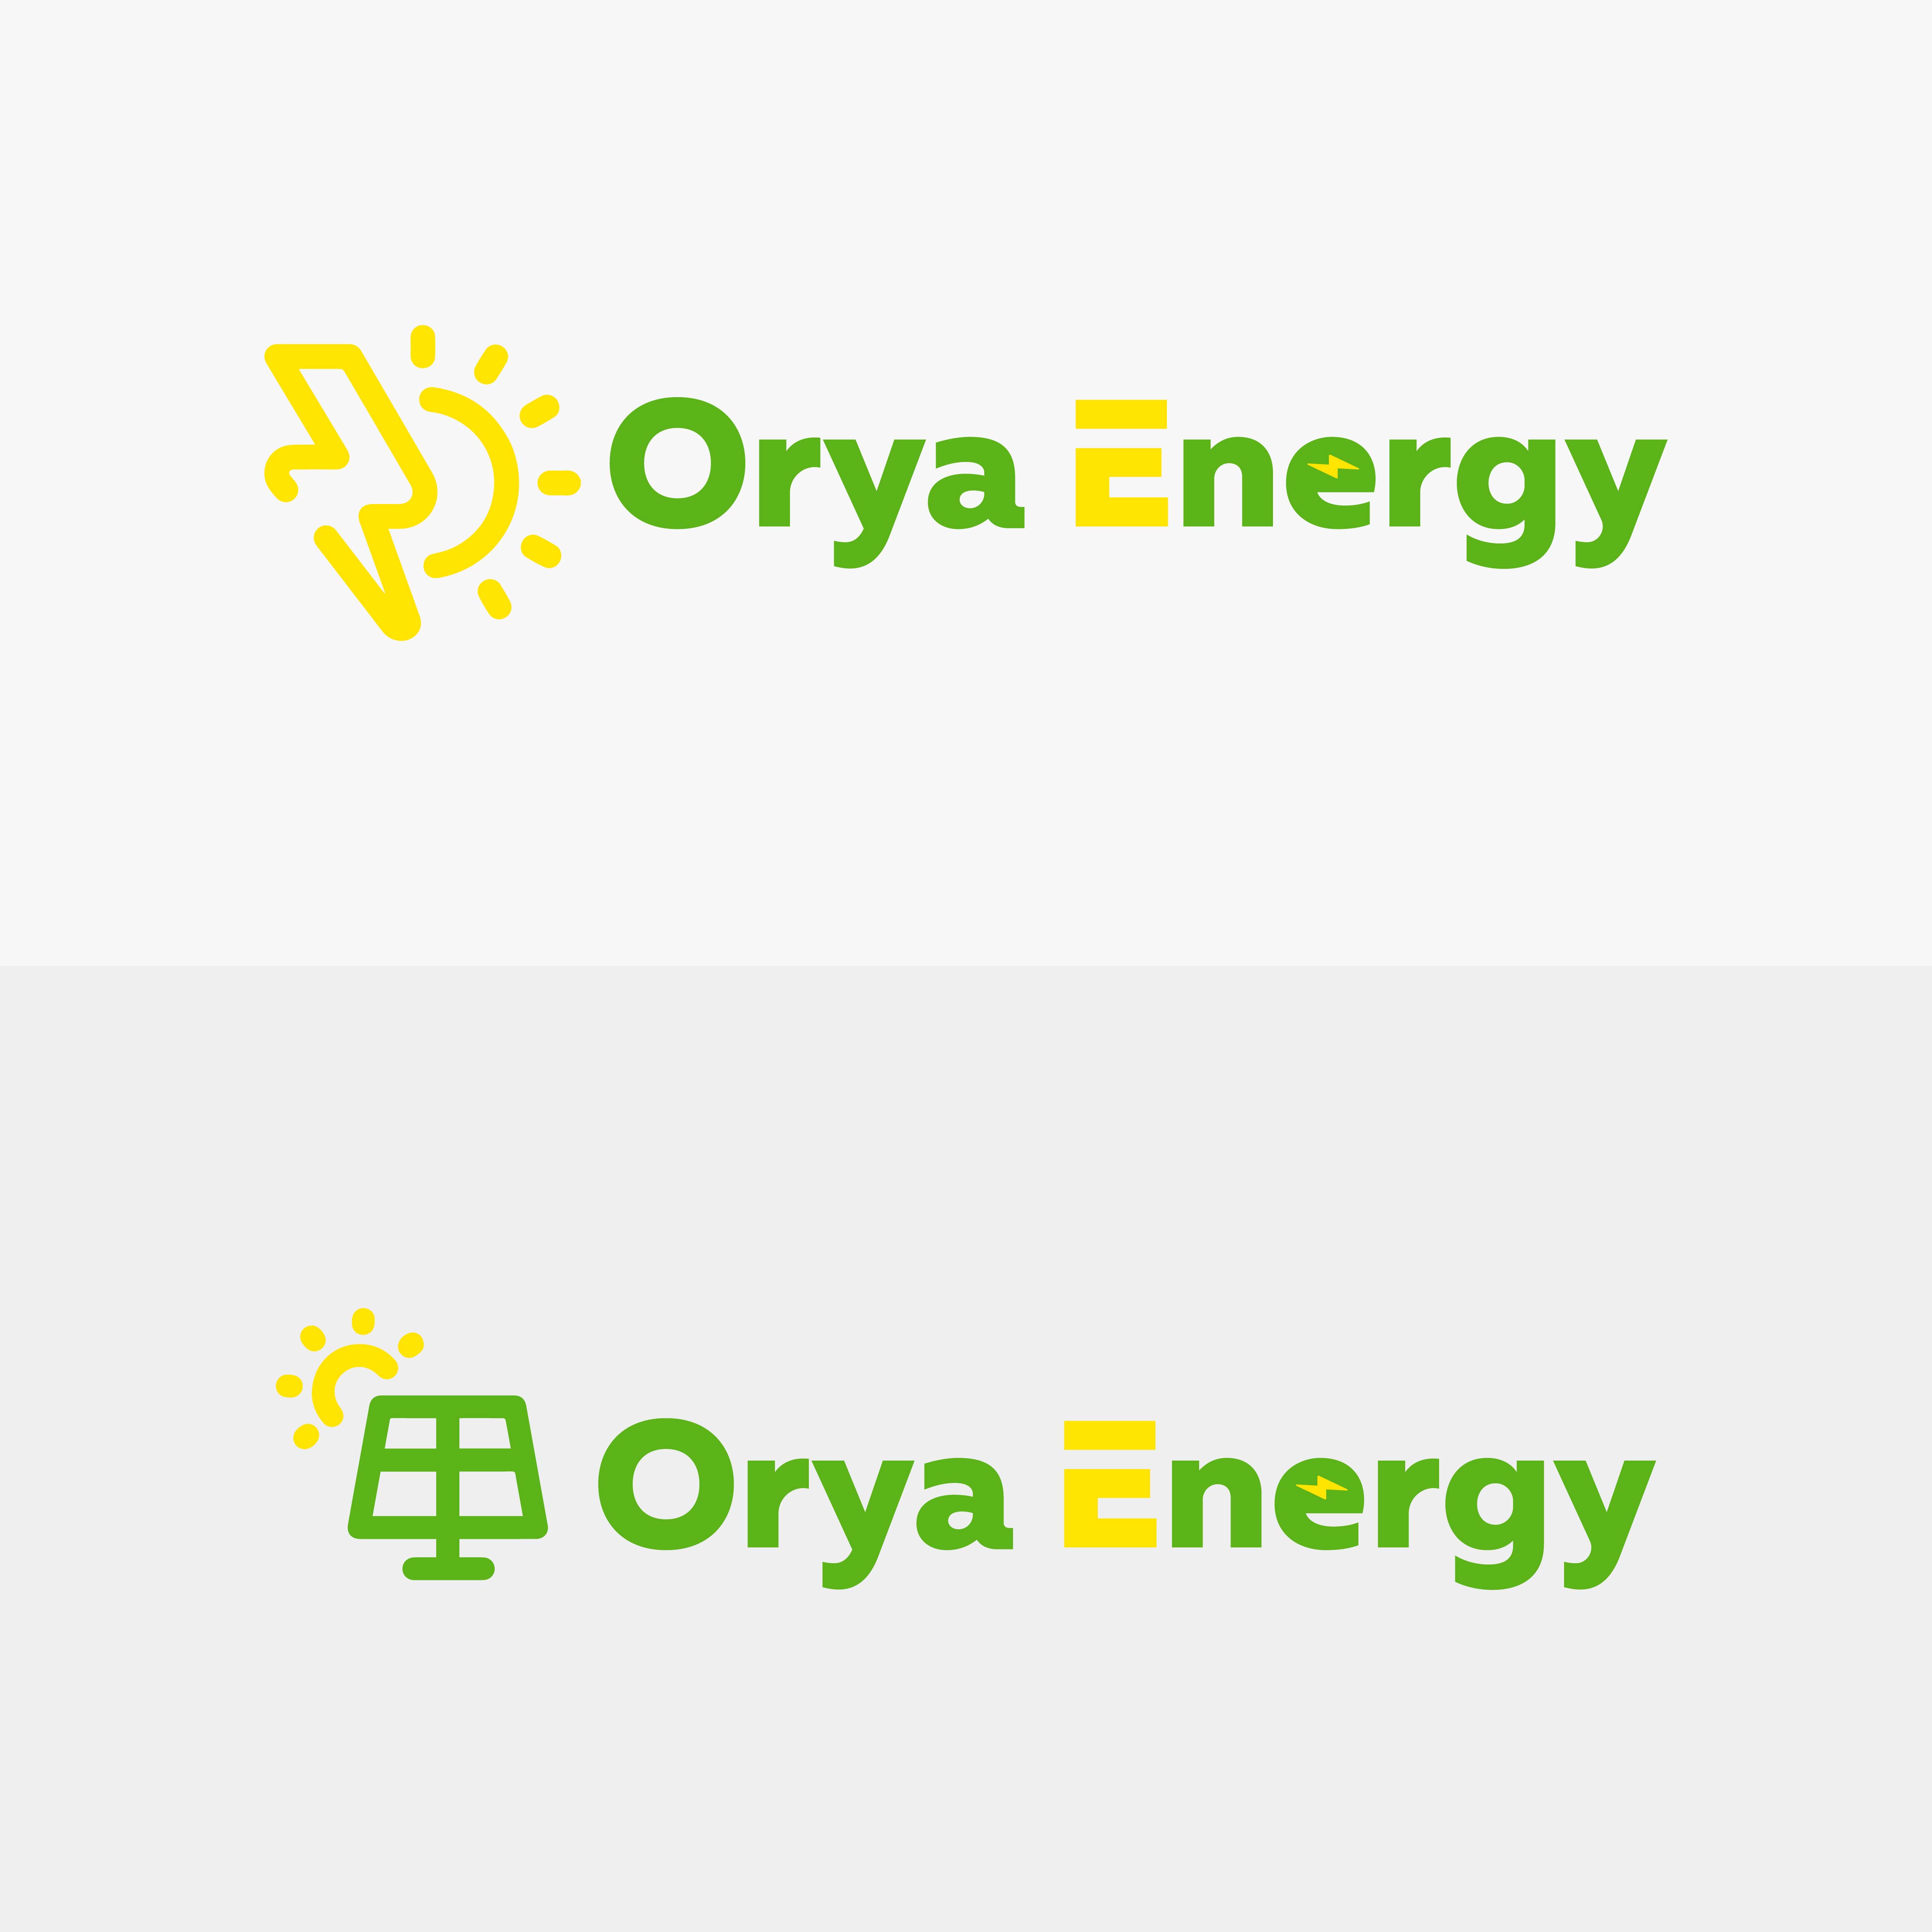 Solar energy logo designs in vector format, featuring sun power elements preview image.